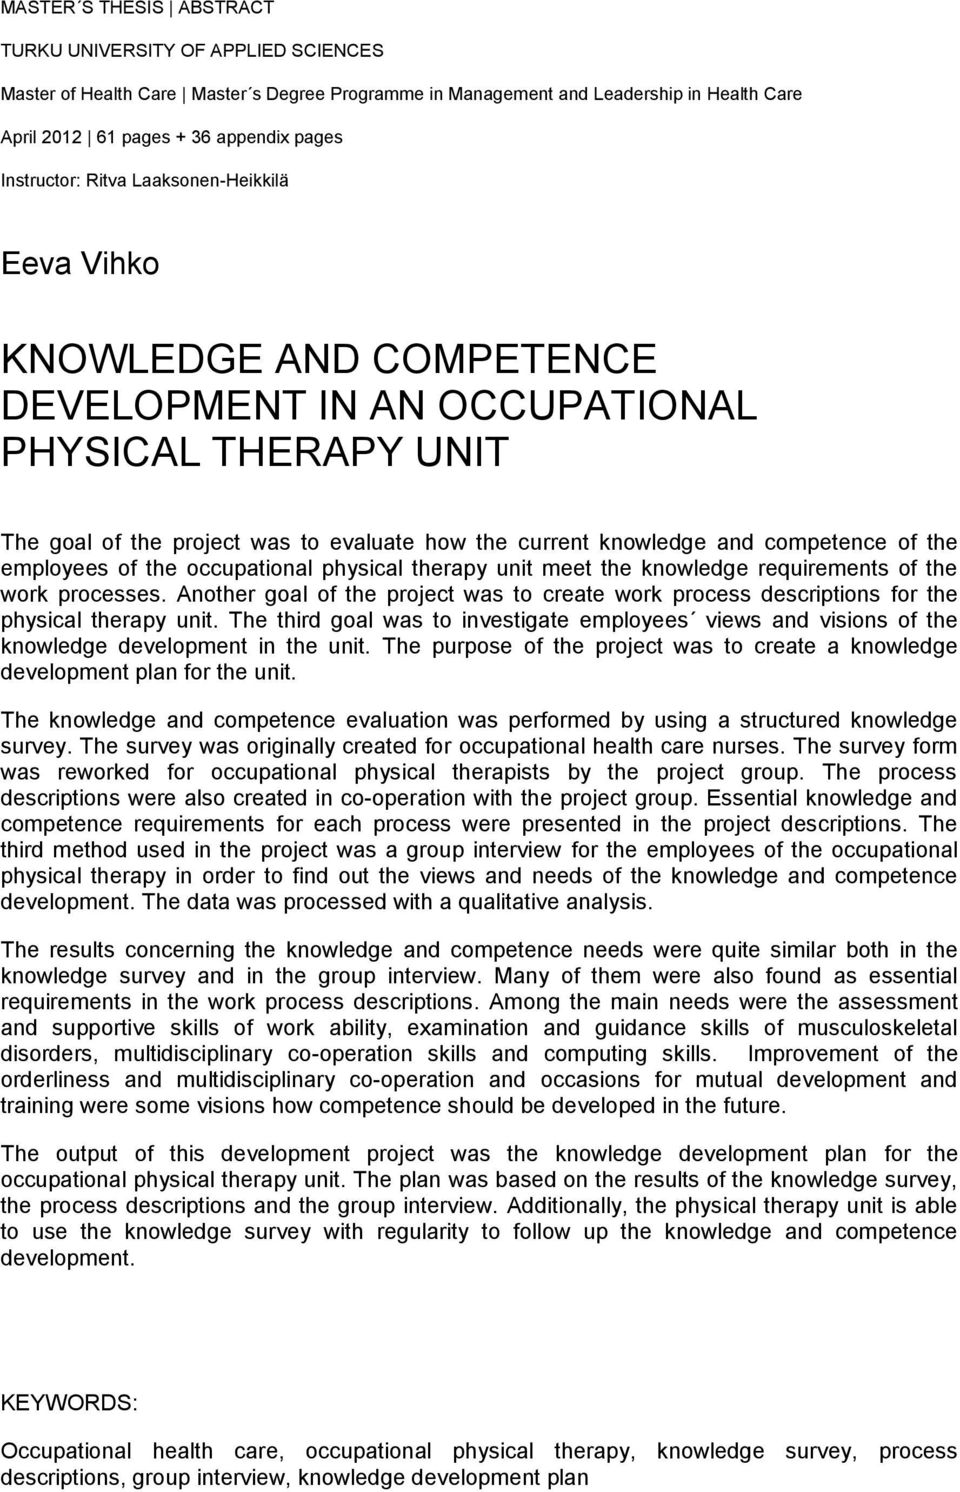 competence of the employees of the occupational physical therapy unit meet the knowledge requirements of the work processes.